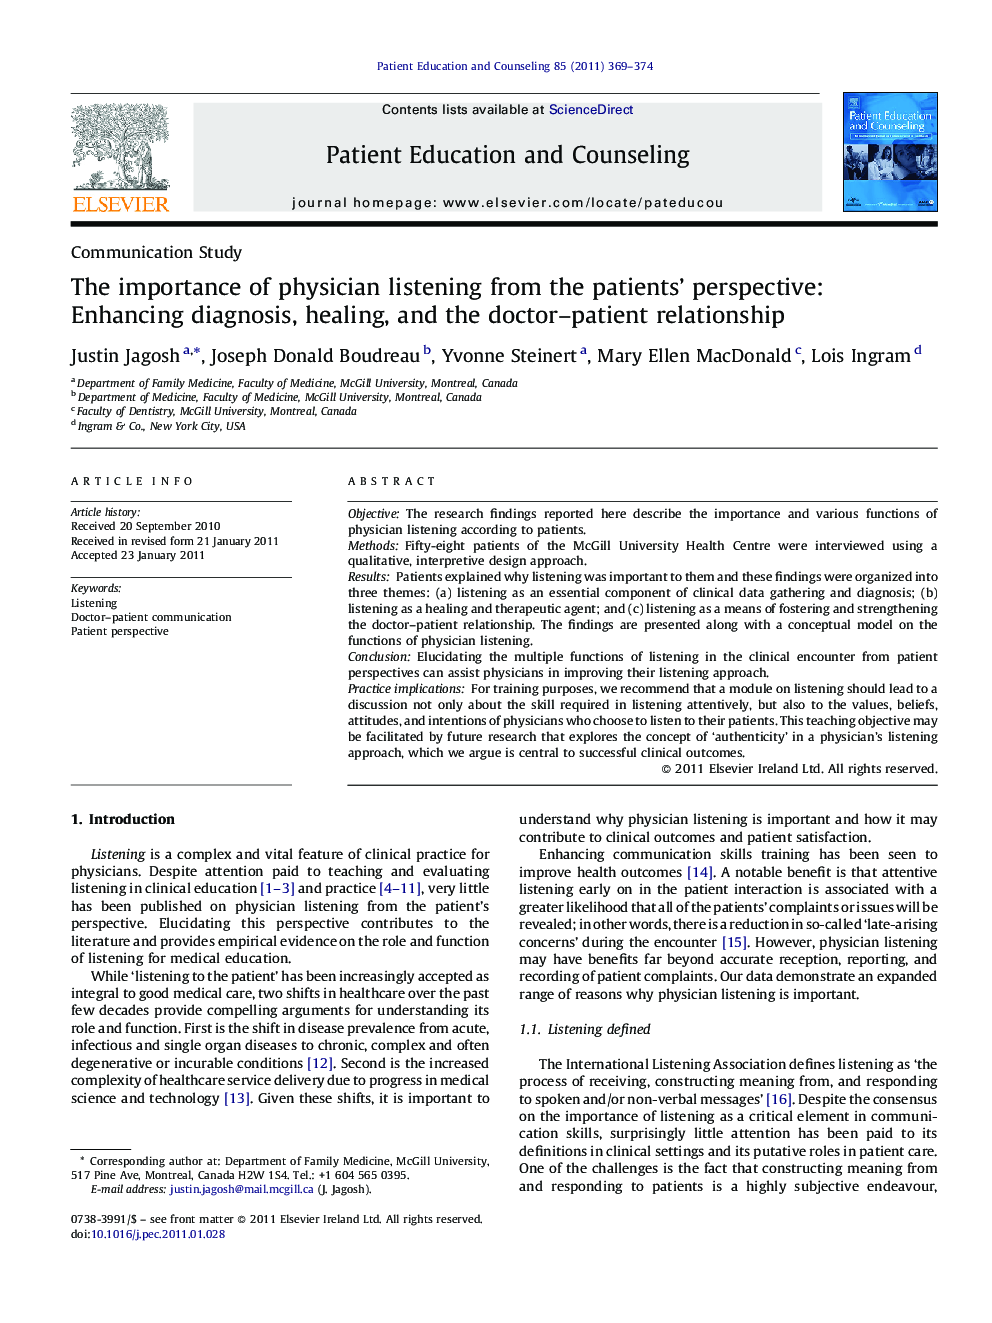 The importance of physician listening from the patients' perspective: Enhancing diagnosis, healing, and the doctor-patient relationship